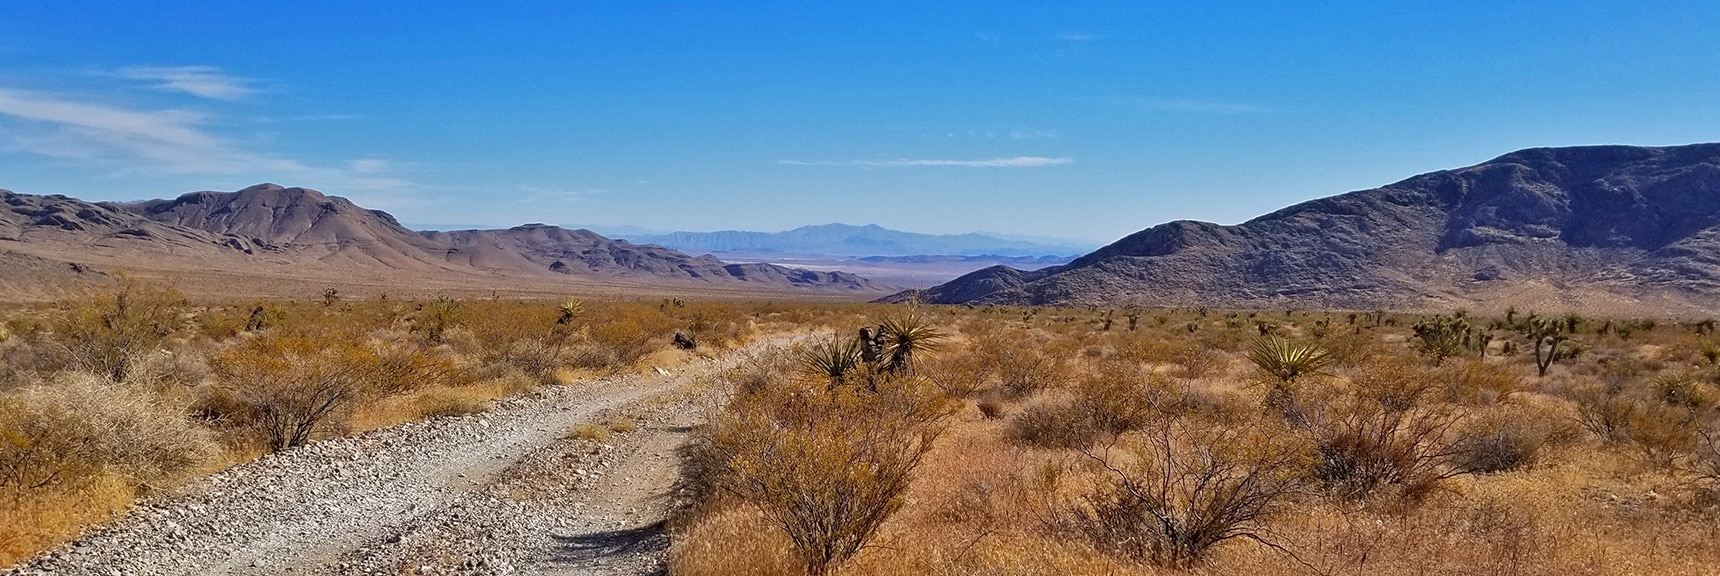 View Down Gass Peak Road Toward Hwy 93 and Valley of Fire Area | Gass Peak Road Circuit | Desert National Wildlife Refuge | Nevada